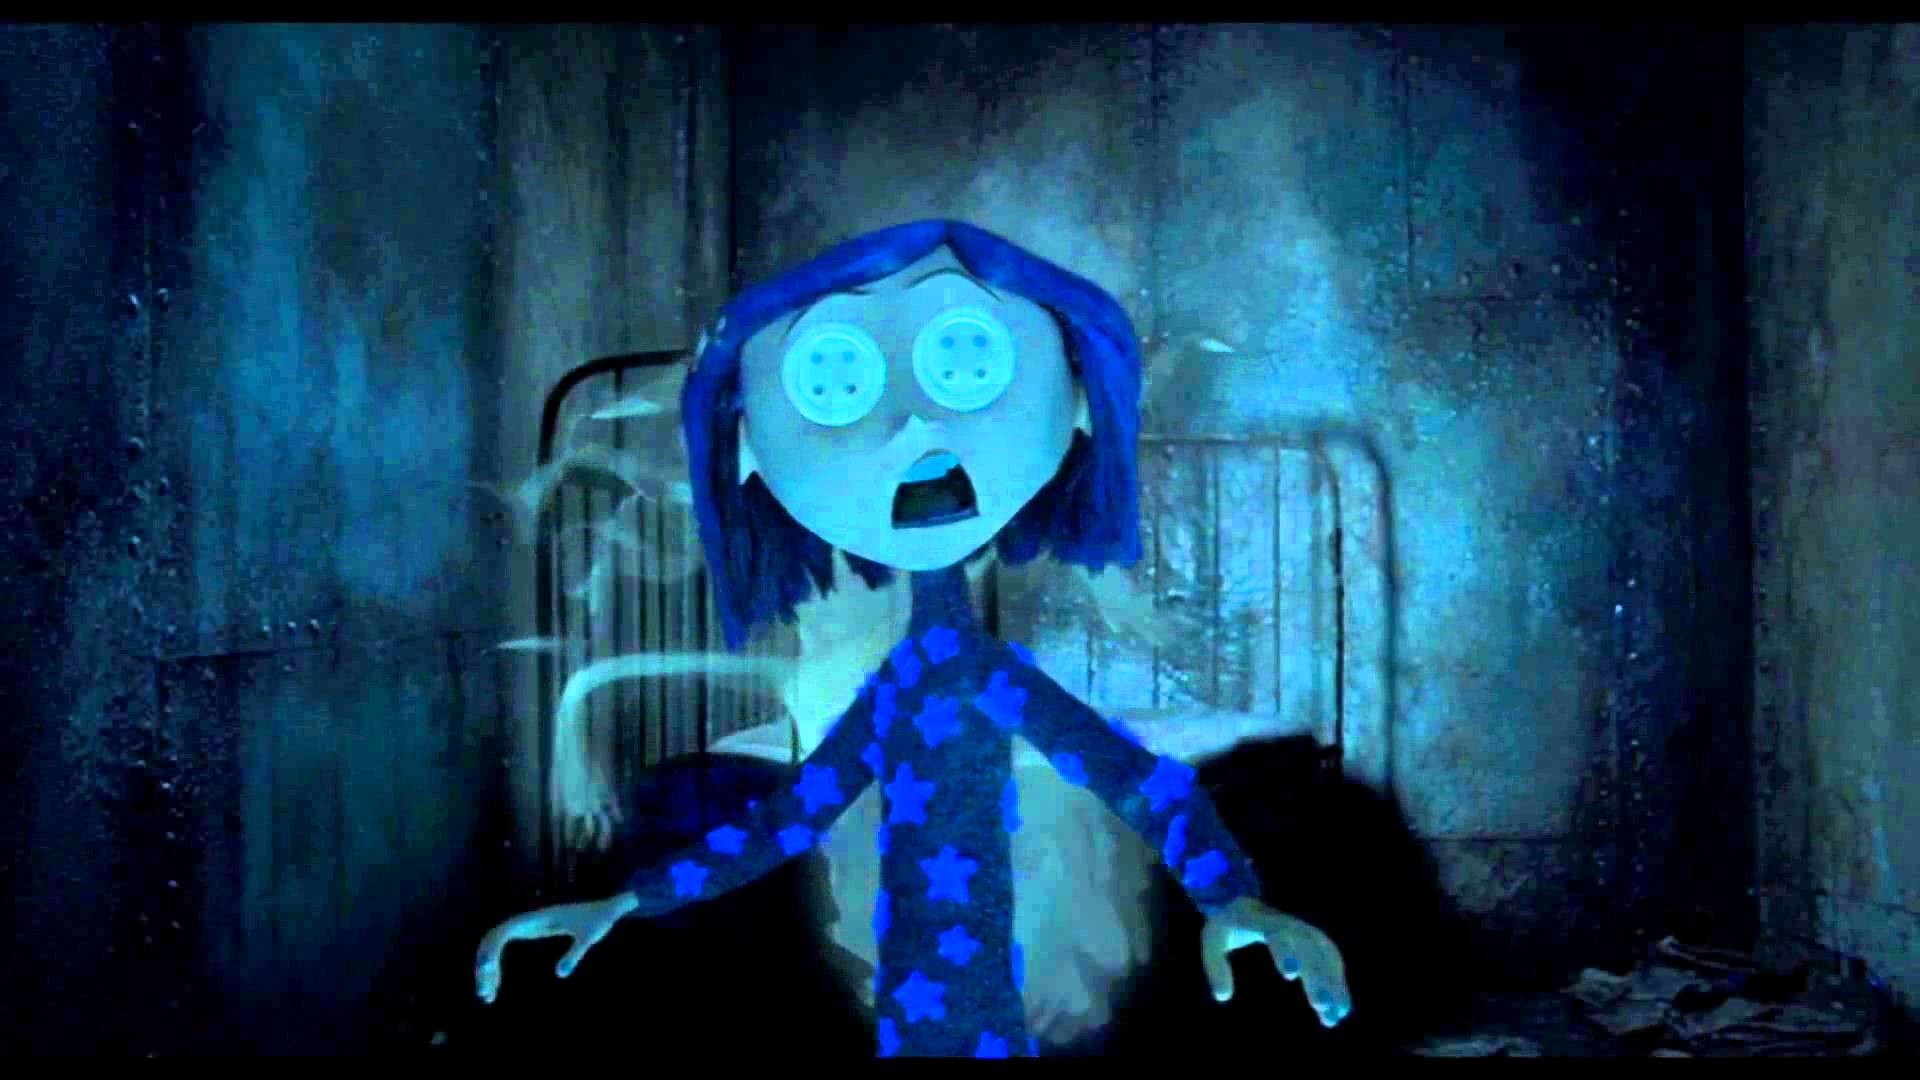 1920x1080 images about Coraline on Pinterest Posts, Mothers and Cartoon 1920Ã1080